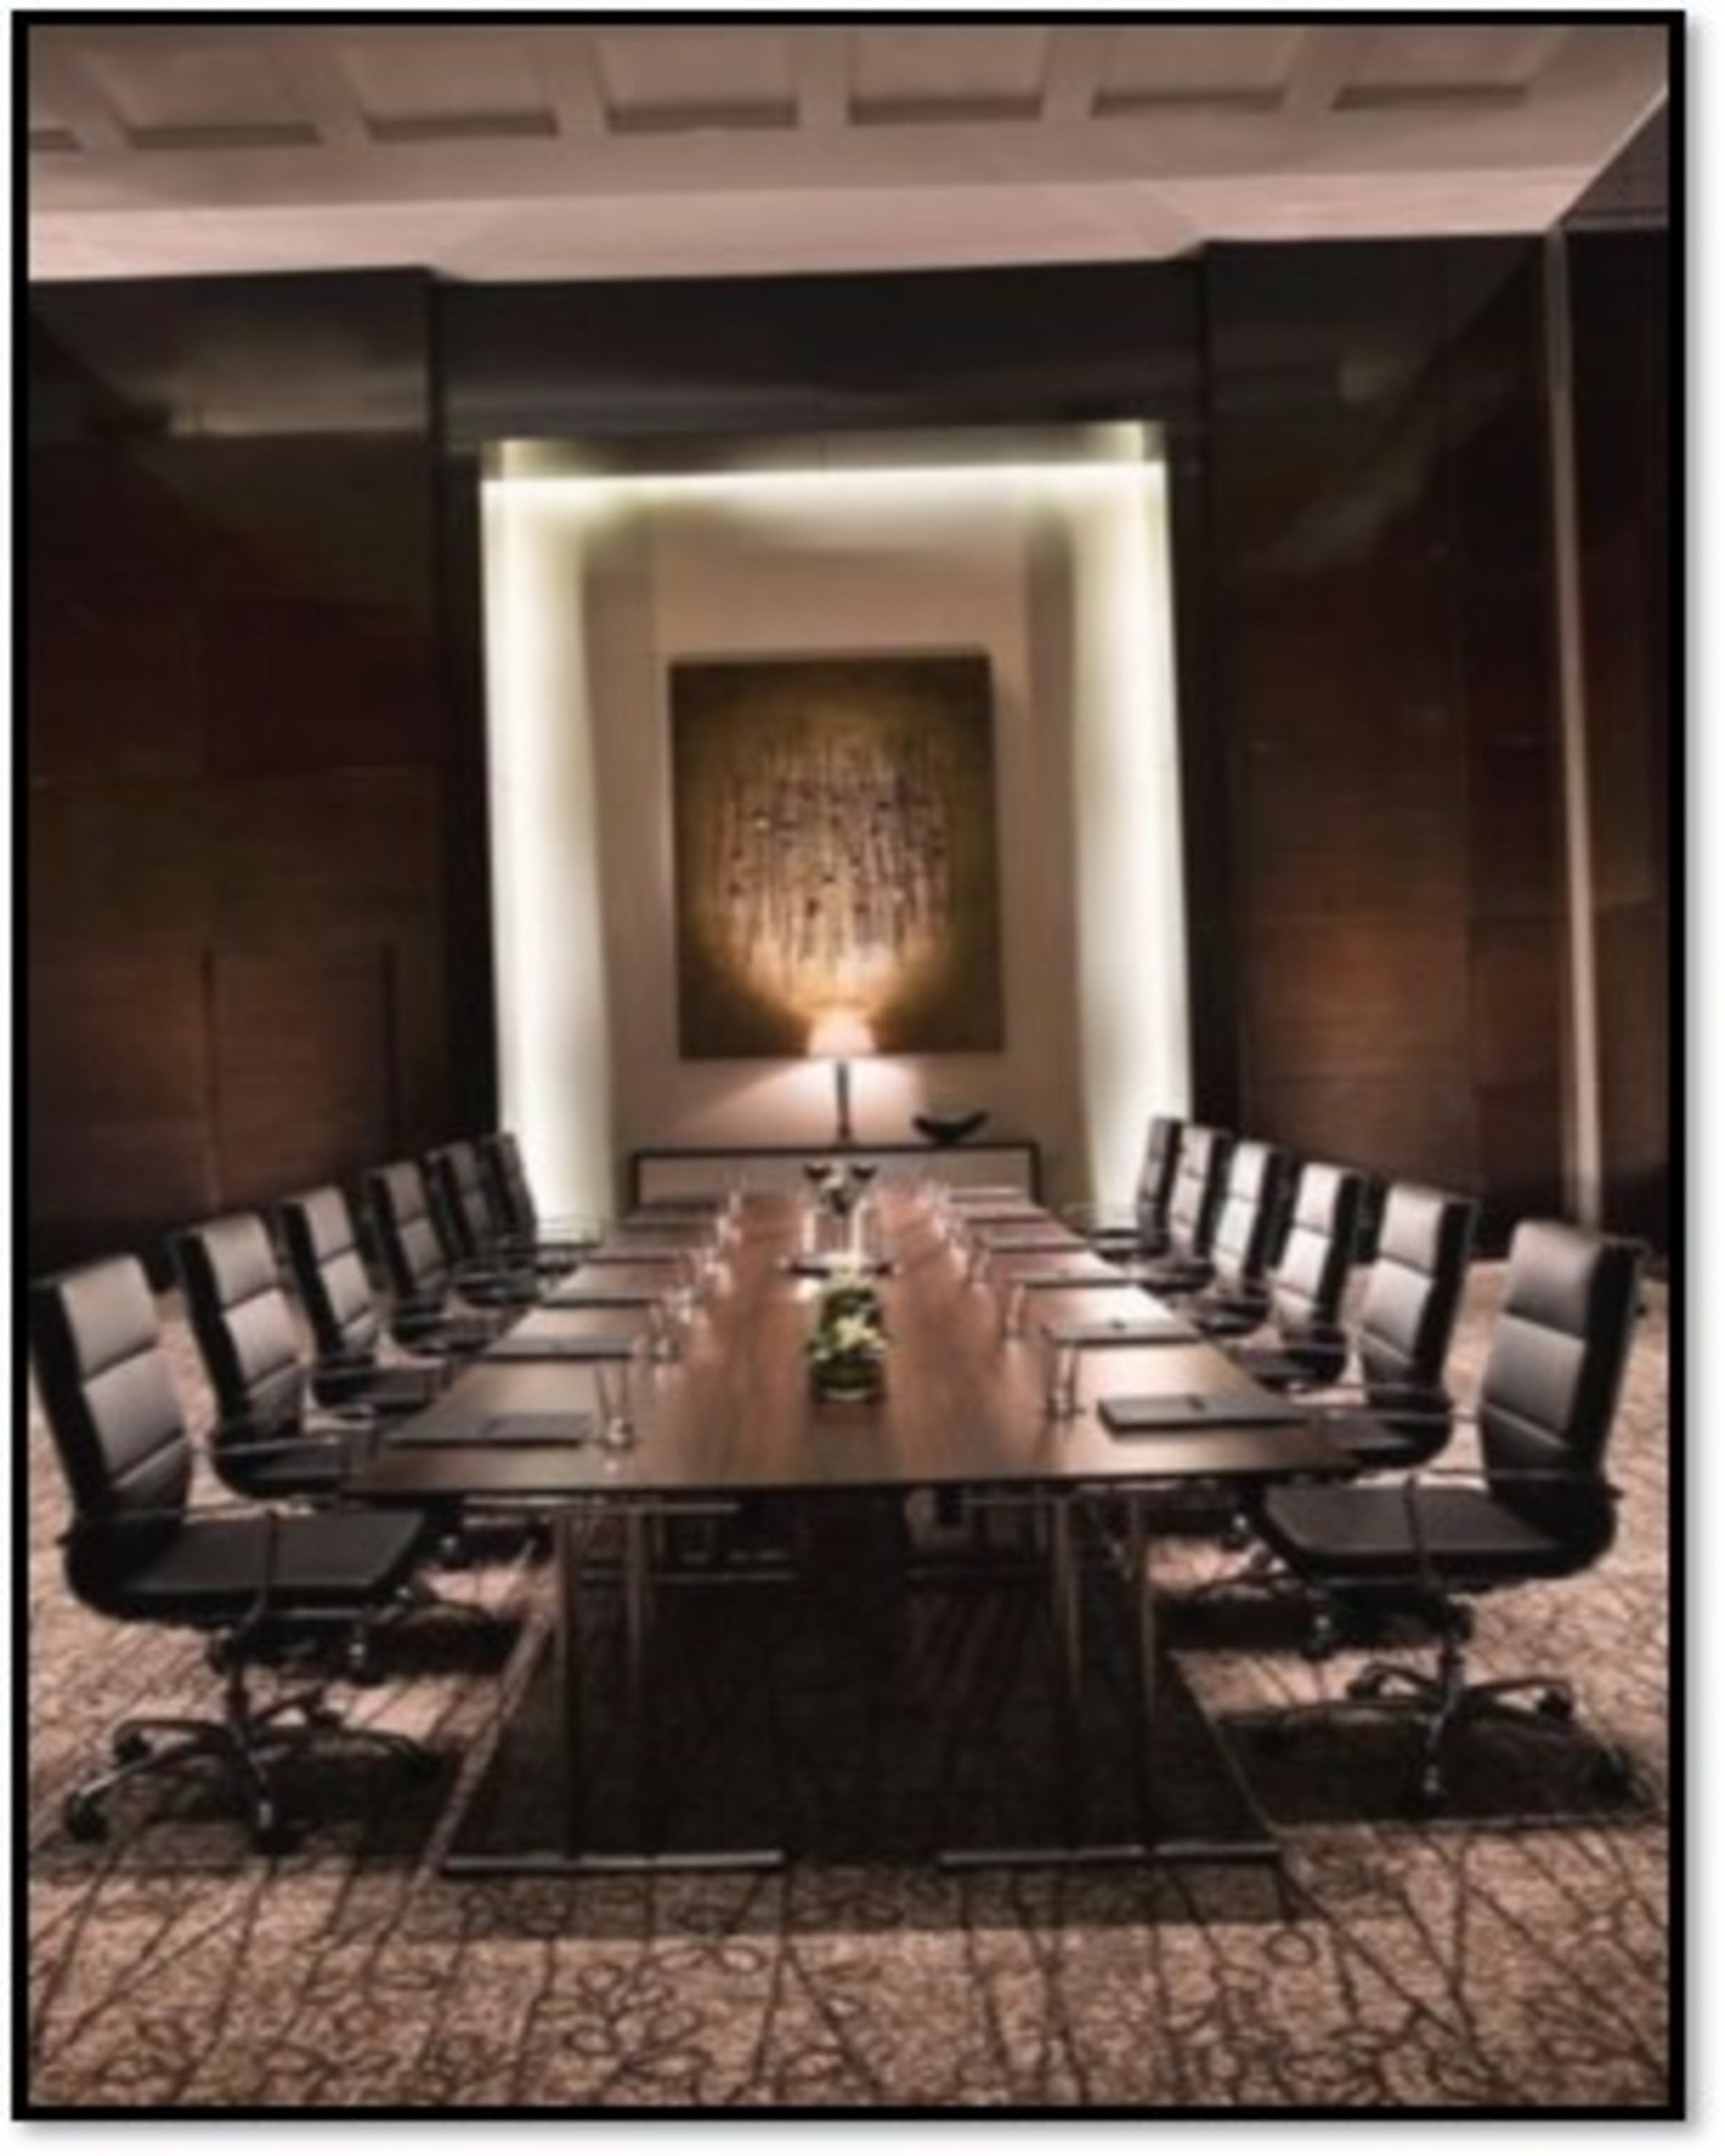 Luxury Conference Table